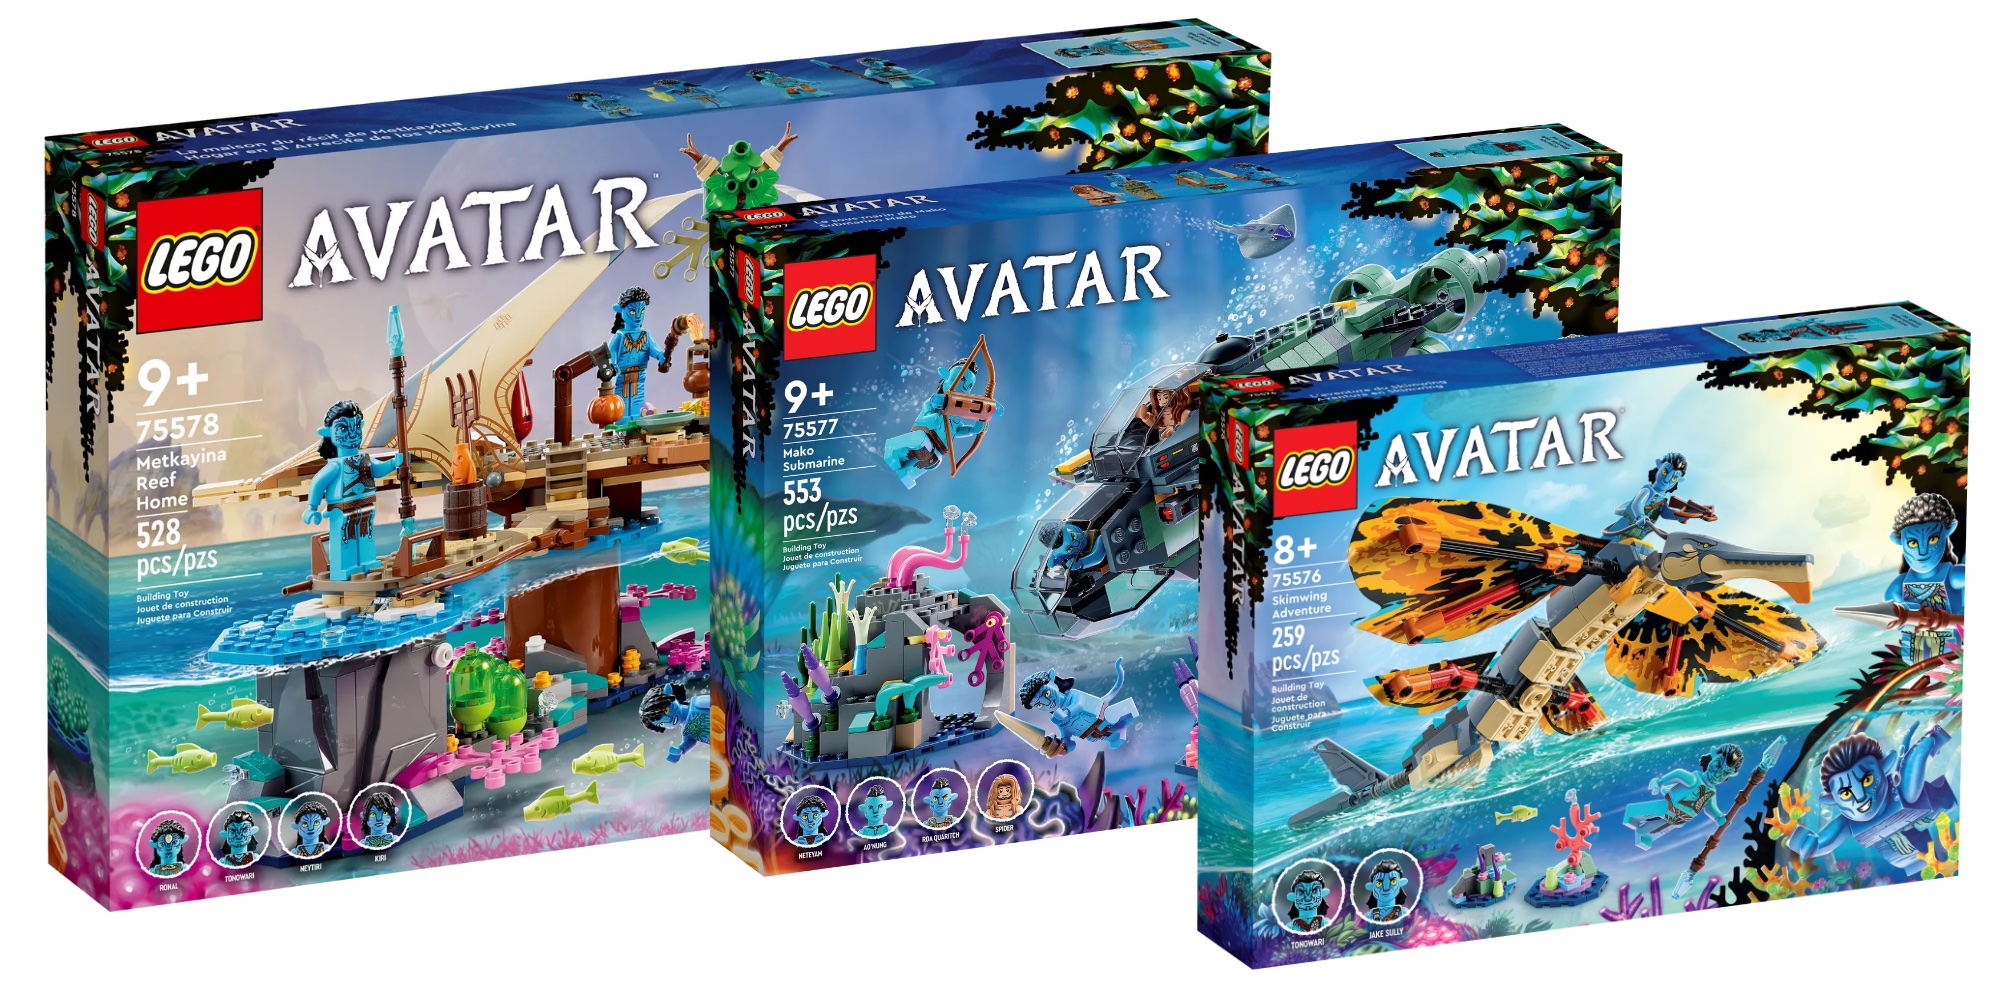 Lego Avatar Way Of The Water Sets Revealed 0490